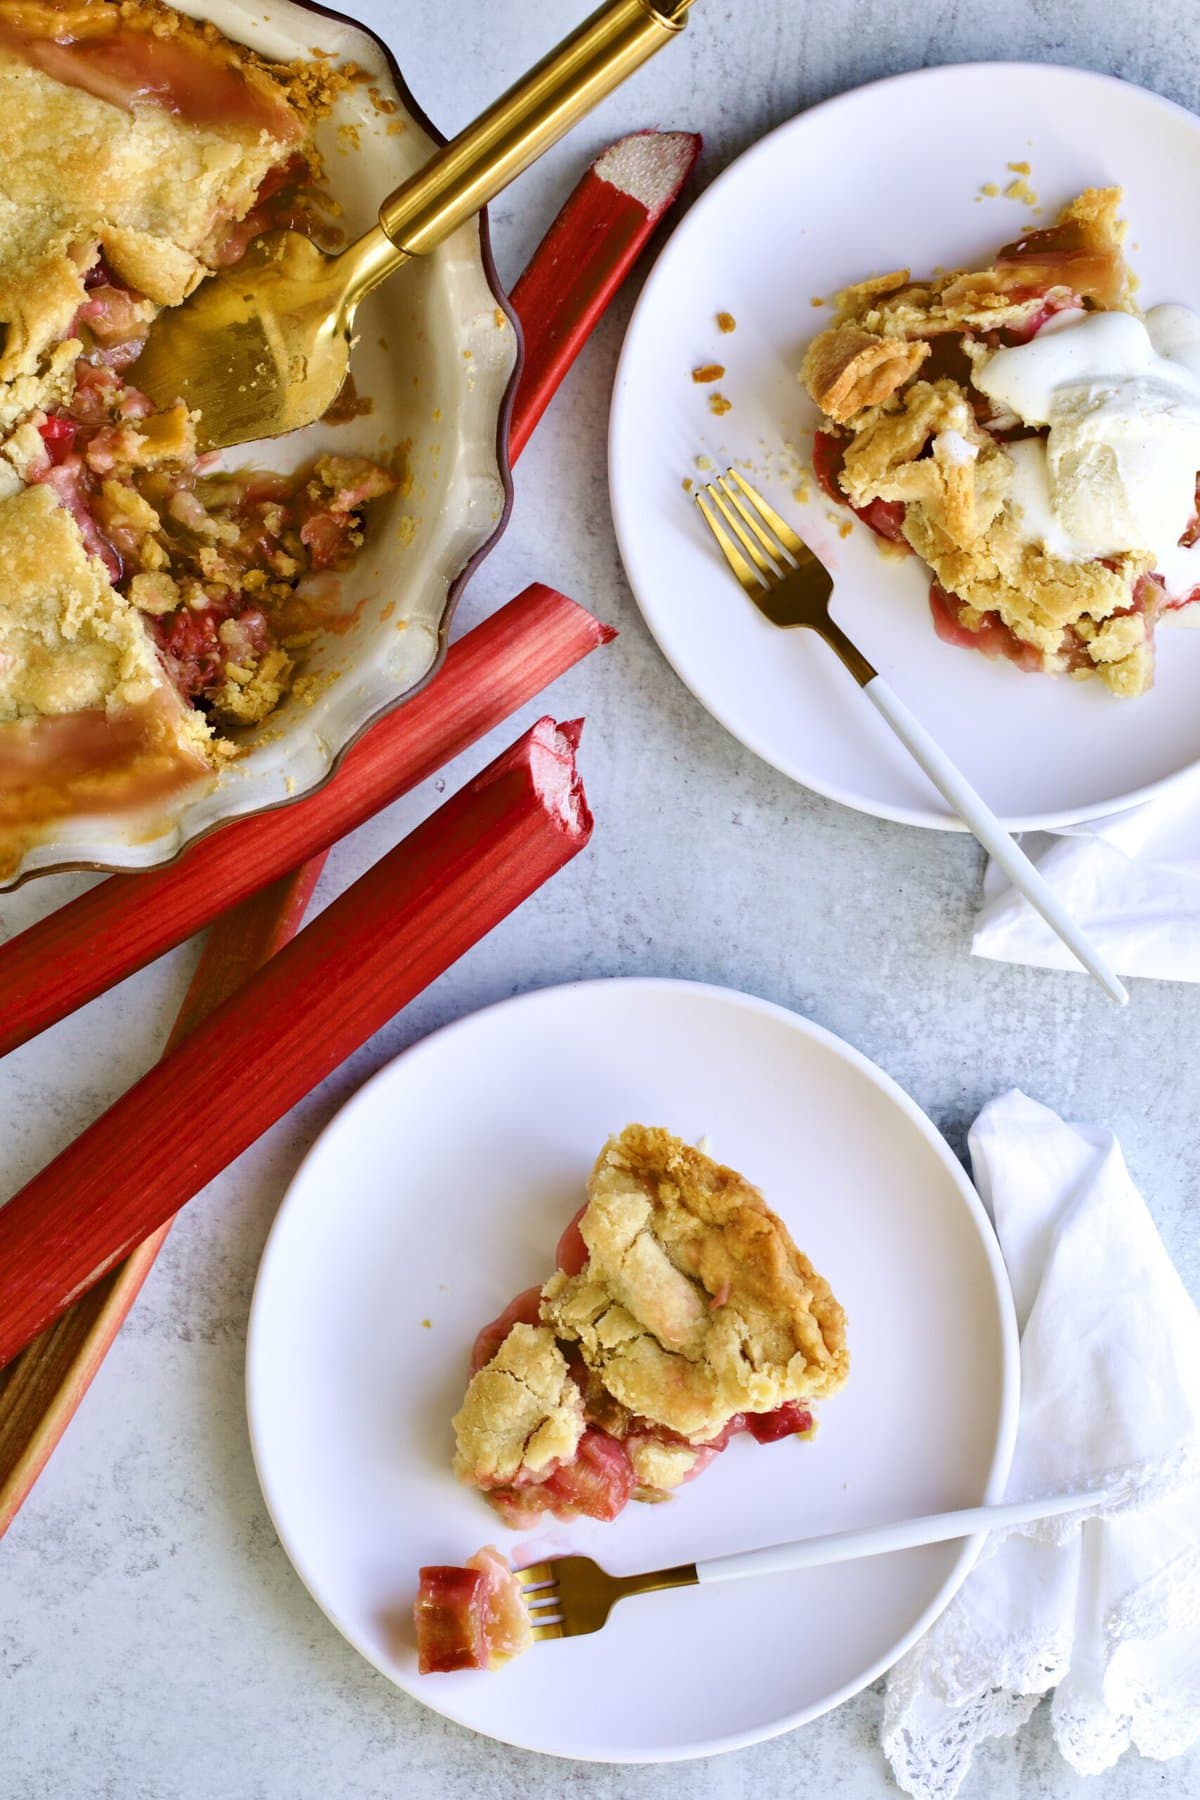 Slices of rhubarb pie on plates with ice cream